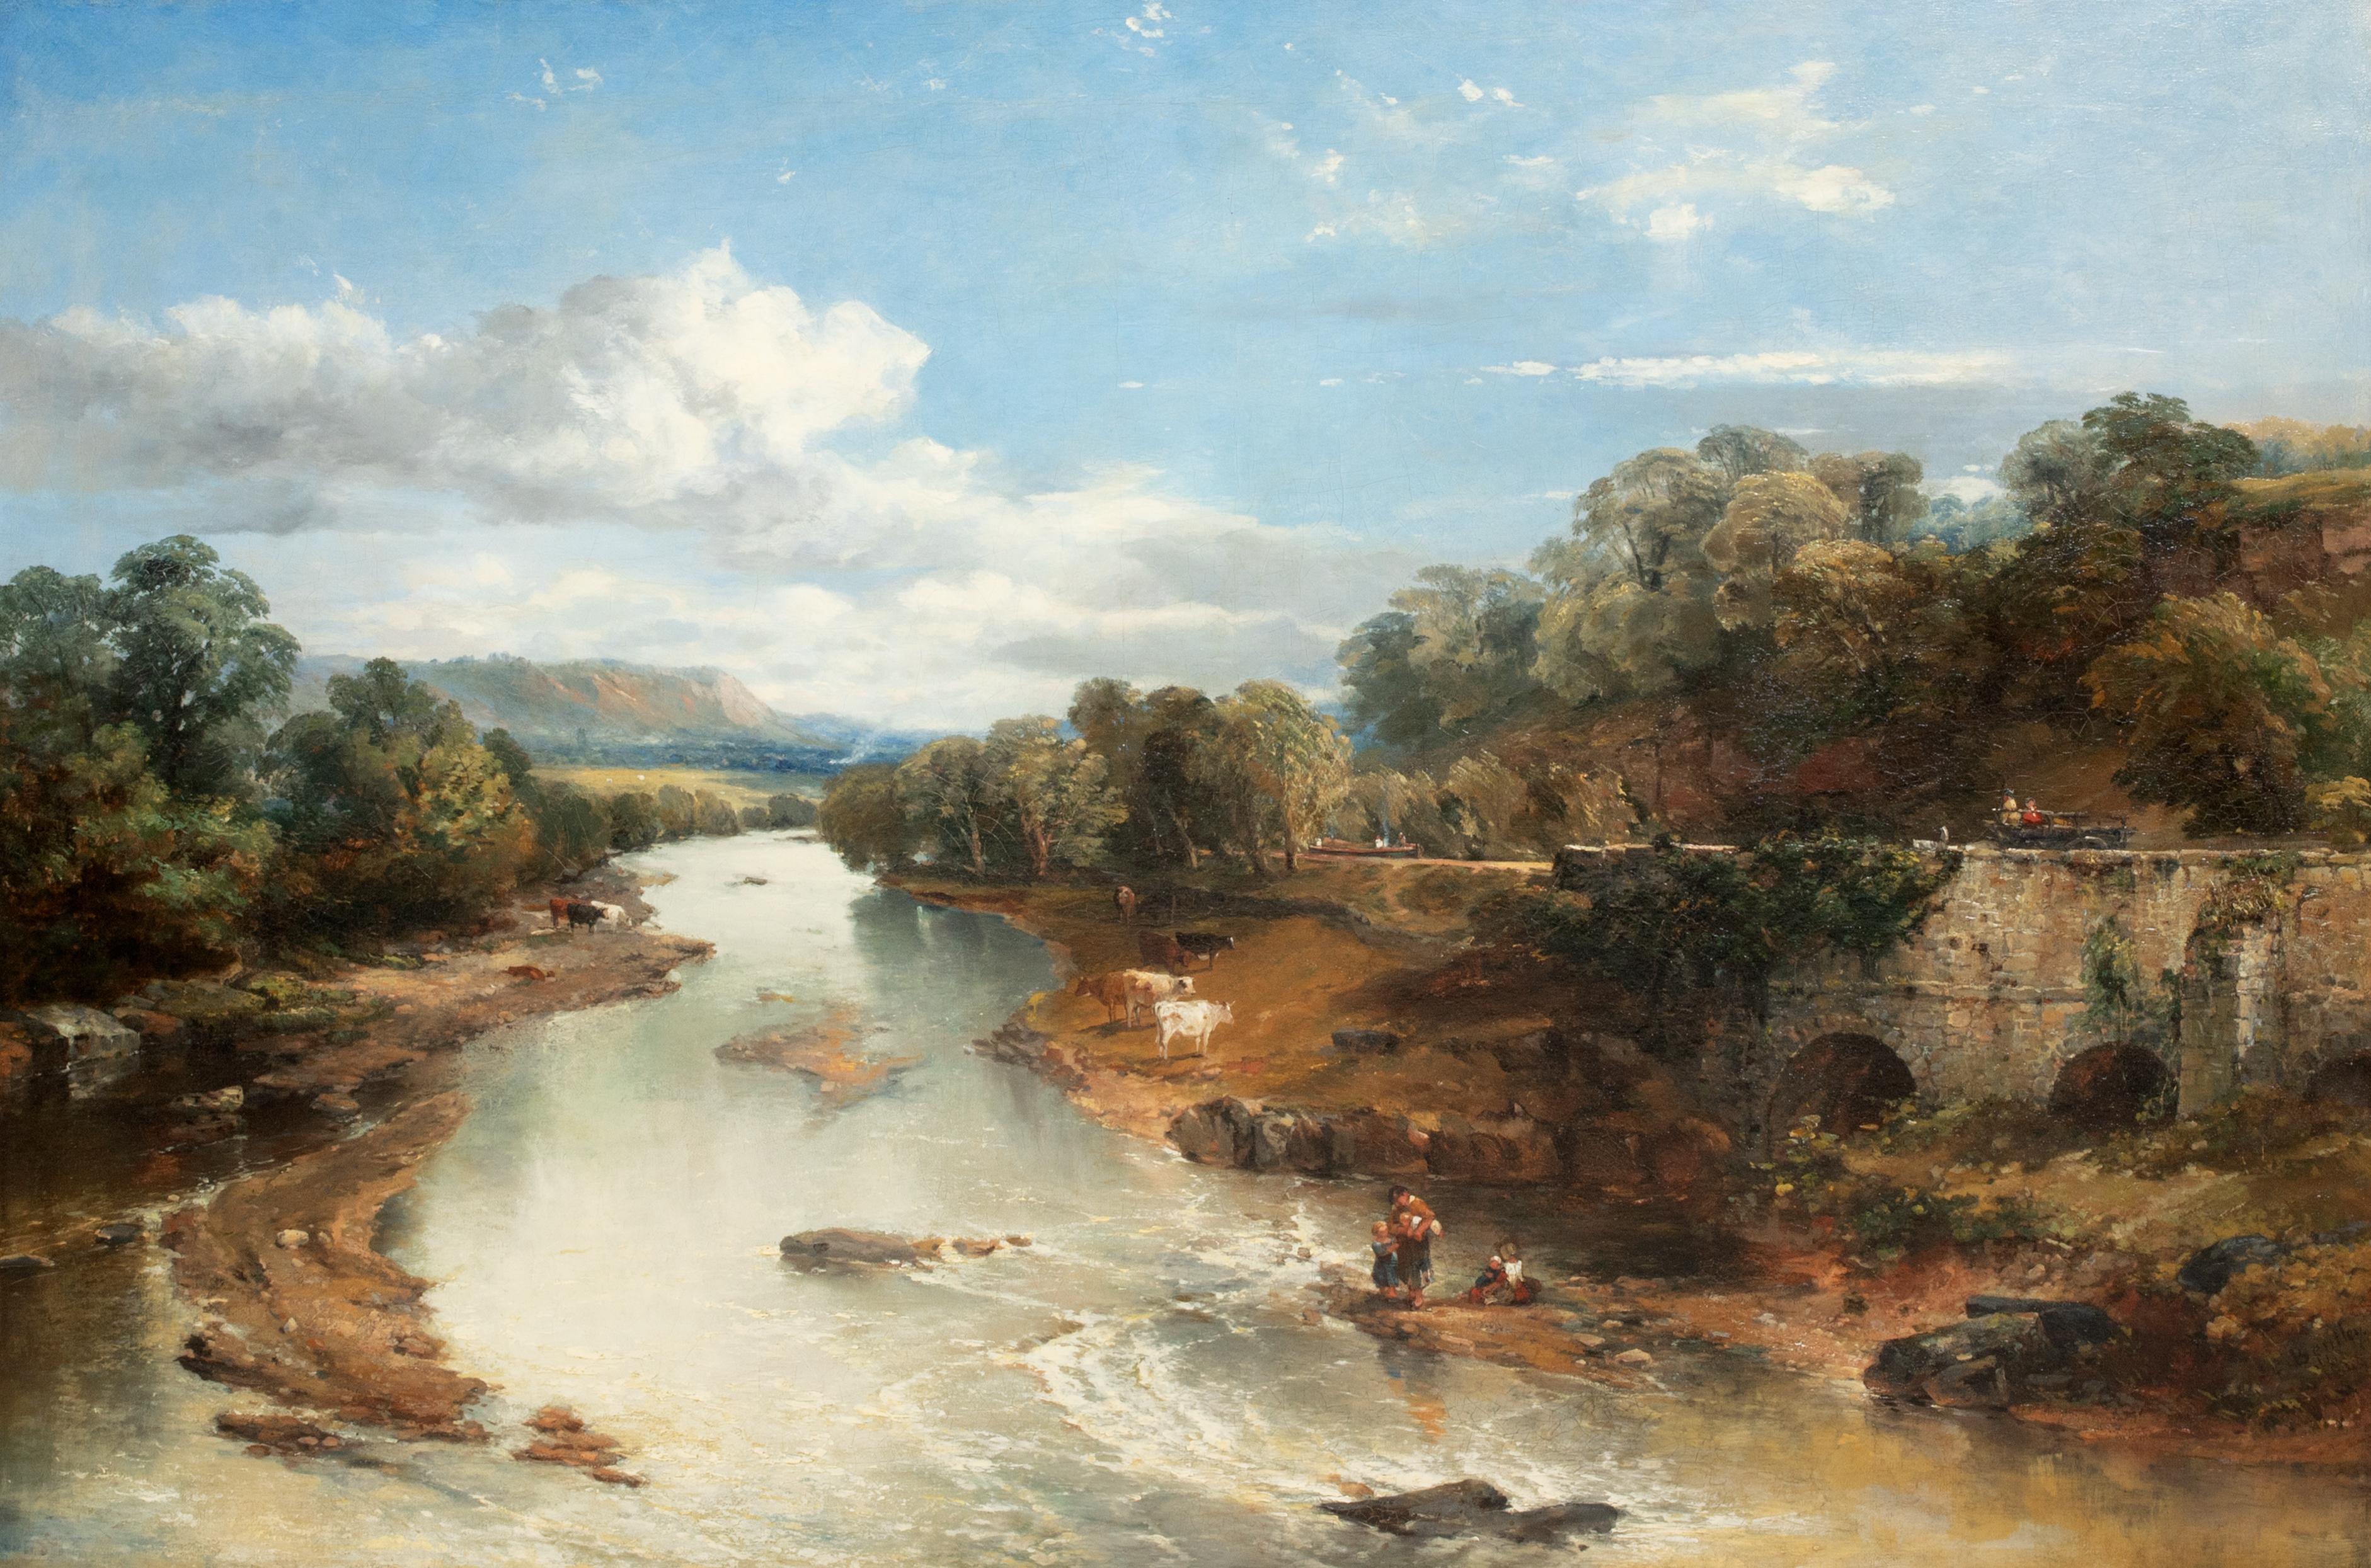  Fishing At The Four Arches, Bingley, Yorkshire, dated 1849

Joseph Clayton Bentley (1809-1851) 

Large 19th Century English river fishing landscape at The Four Arches, Bingley, Yorkshire, oil on canvas by Joseph Clayton Bentley. Excellent quality